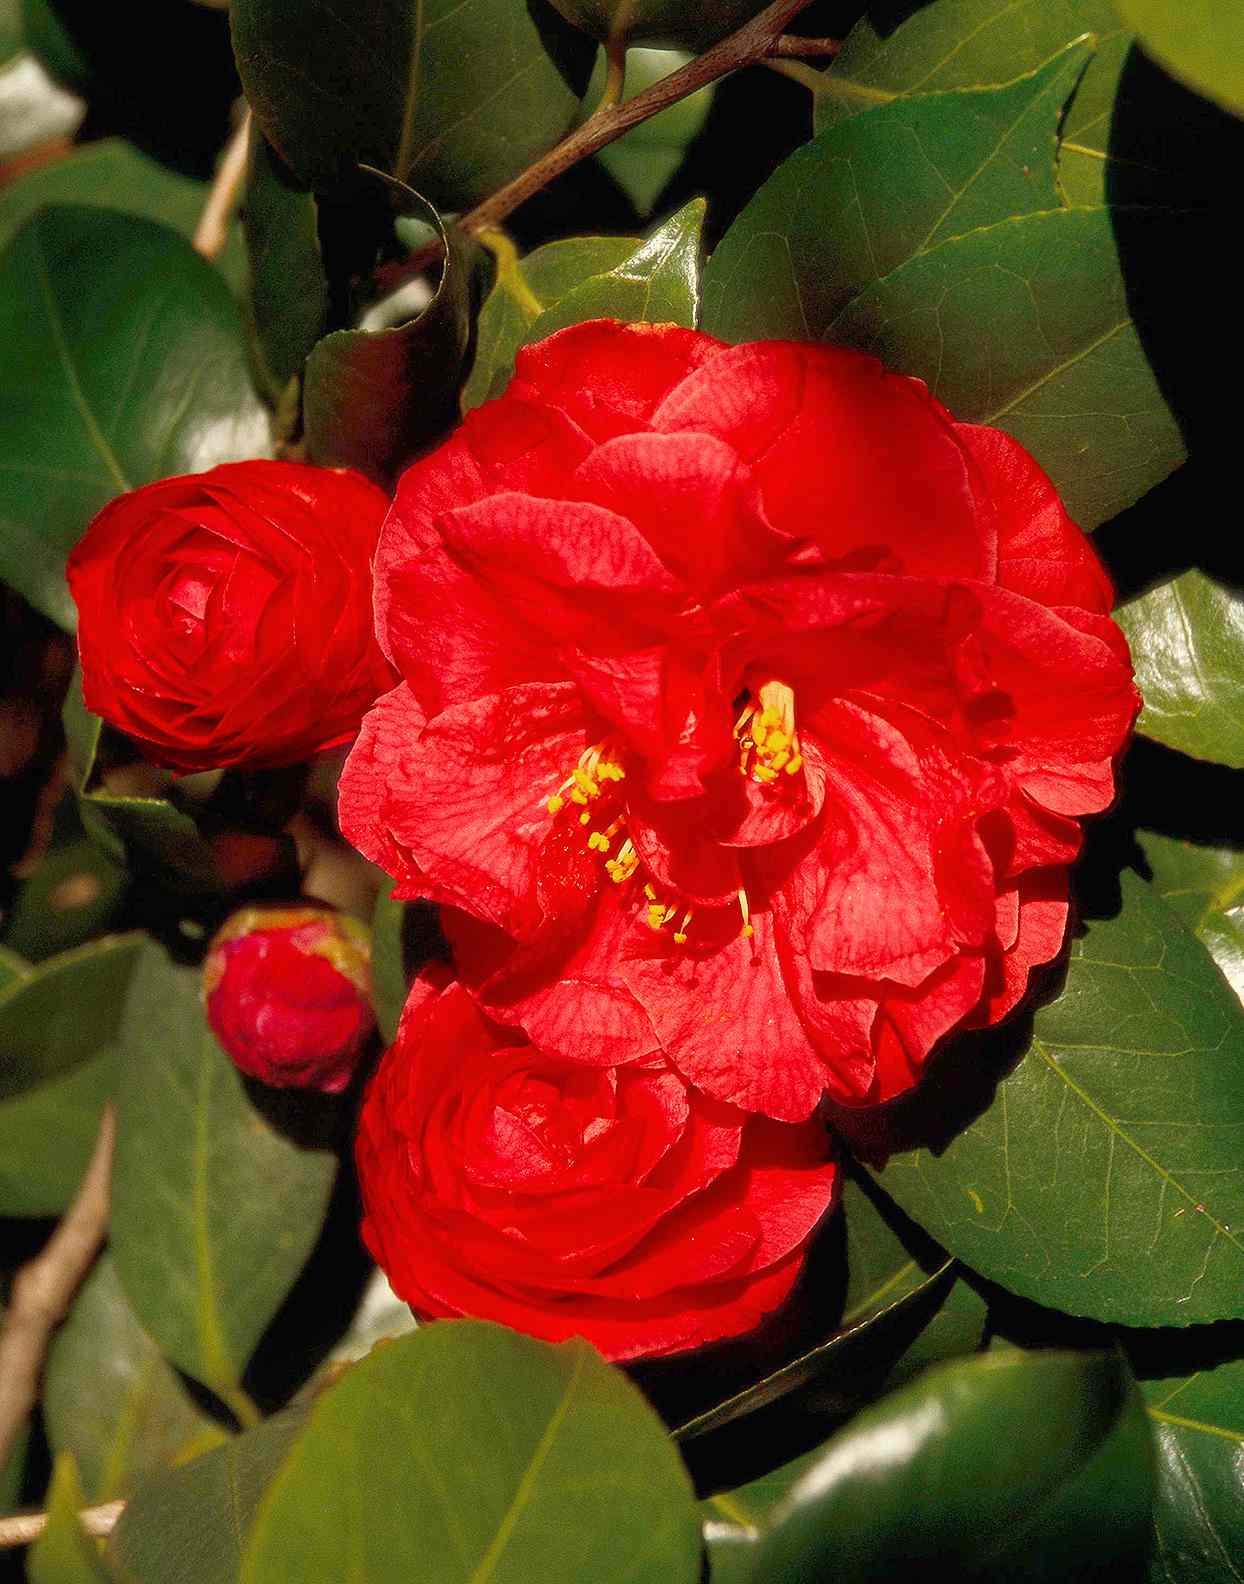 Camellia japonica 'Granada' with red blooms